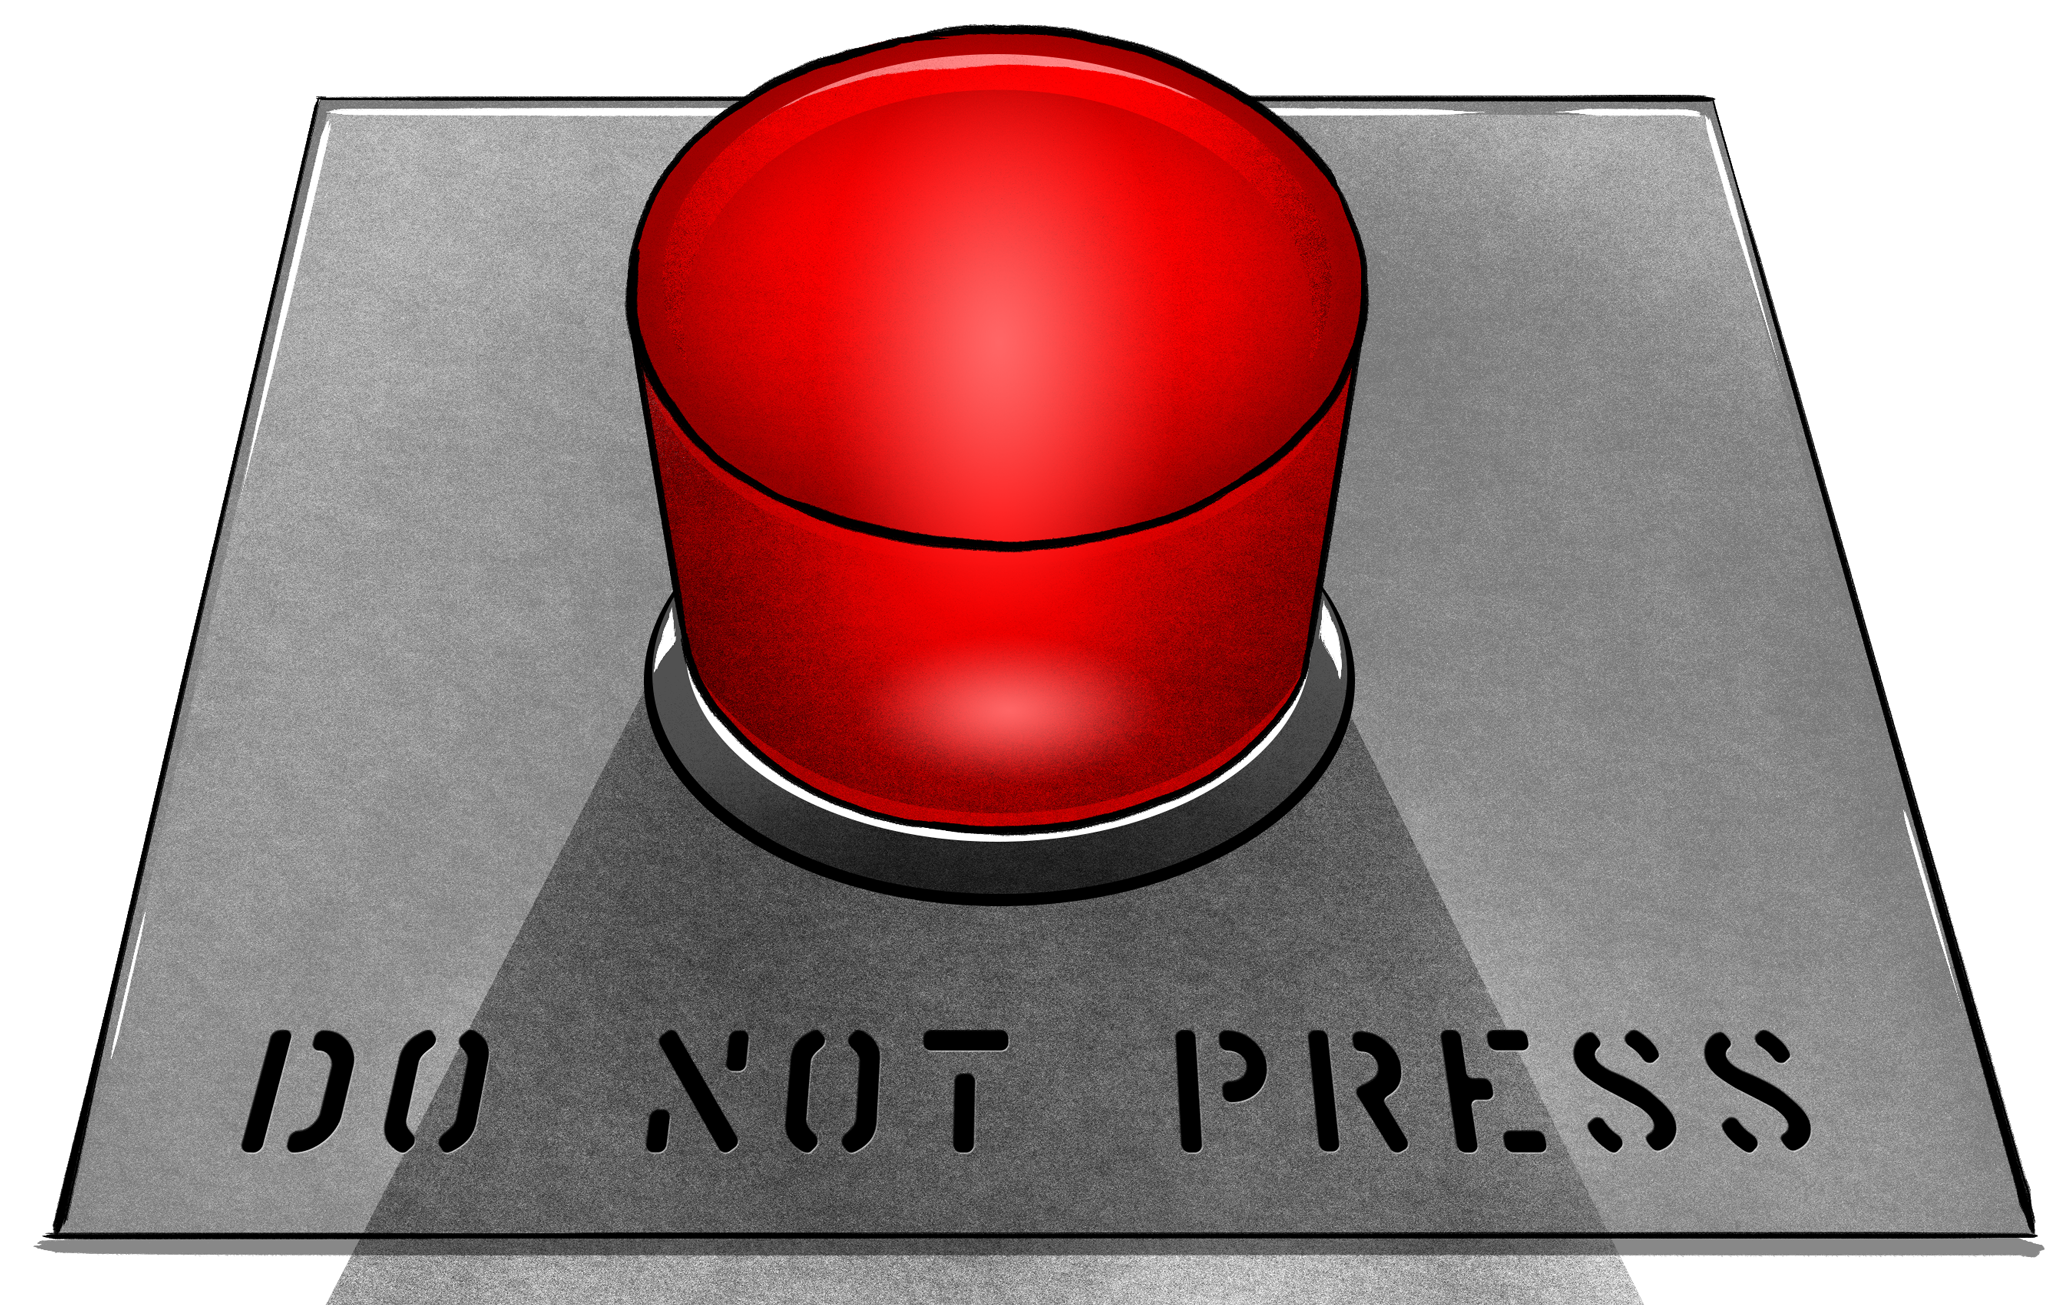 Why We Always Want To Push The Big Red Button